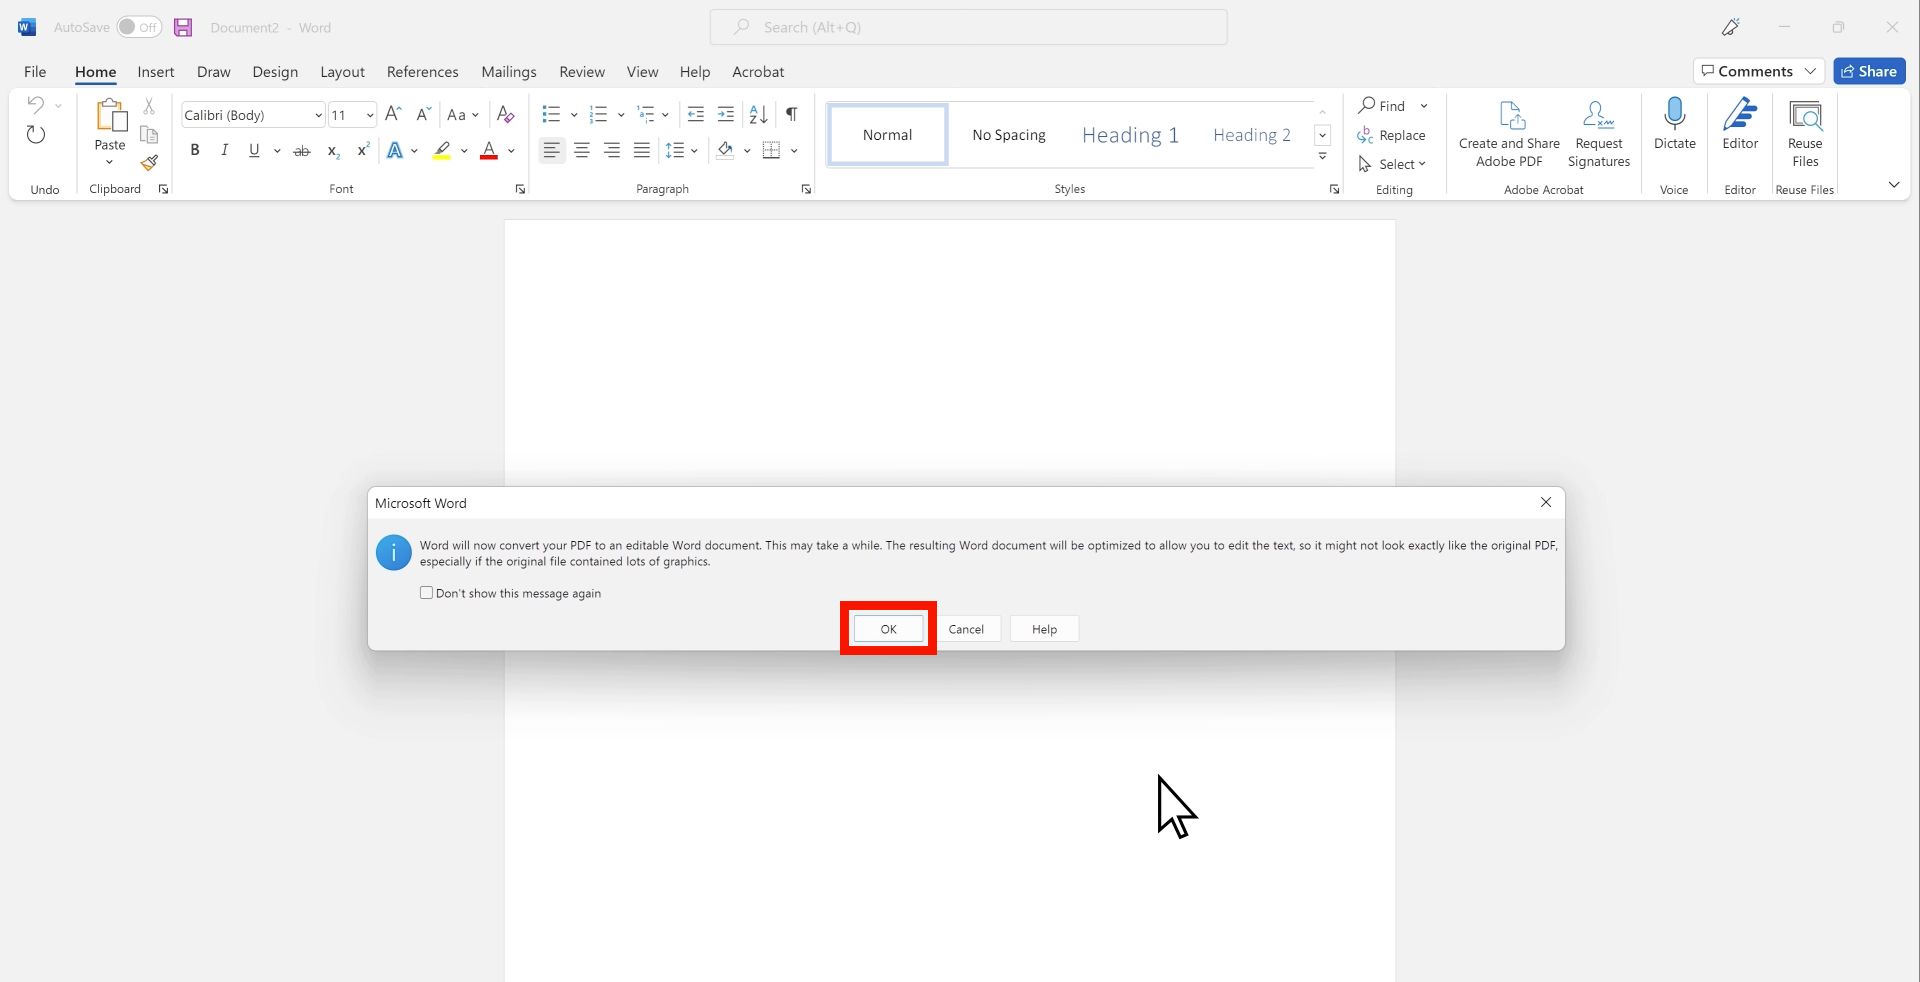 The image shows a notification in Microsoft Word indicating that a PDF will be converted into an editable Word document, with a caution that the conversion may not retain the original layout, especially with graphics with OK selected.